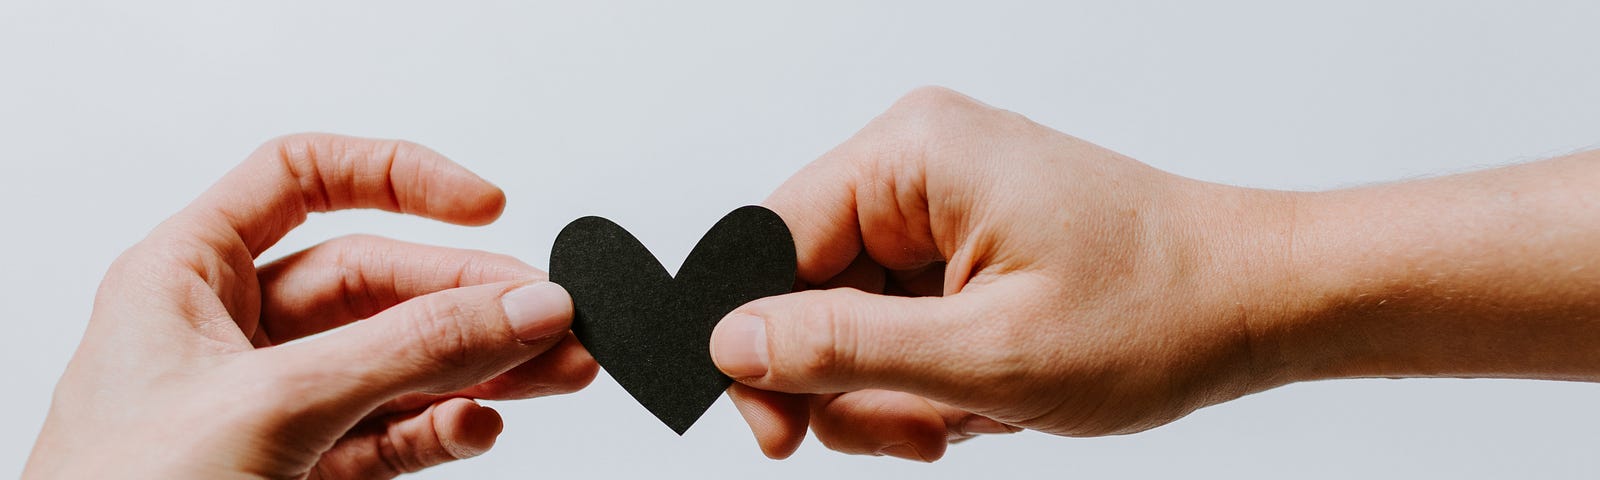 A hand passing a black paper heart to another hand